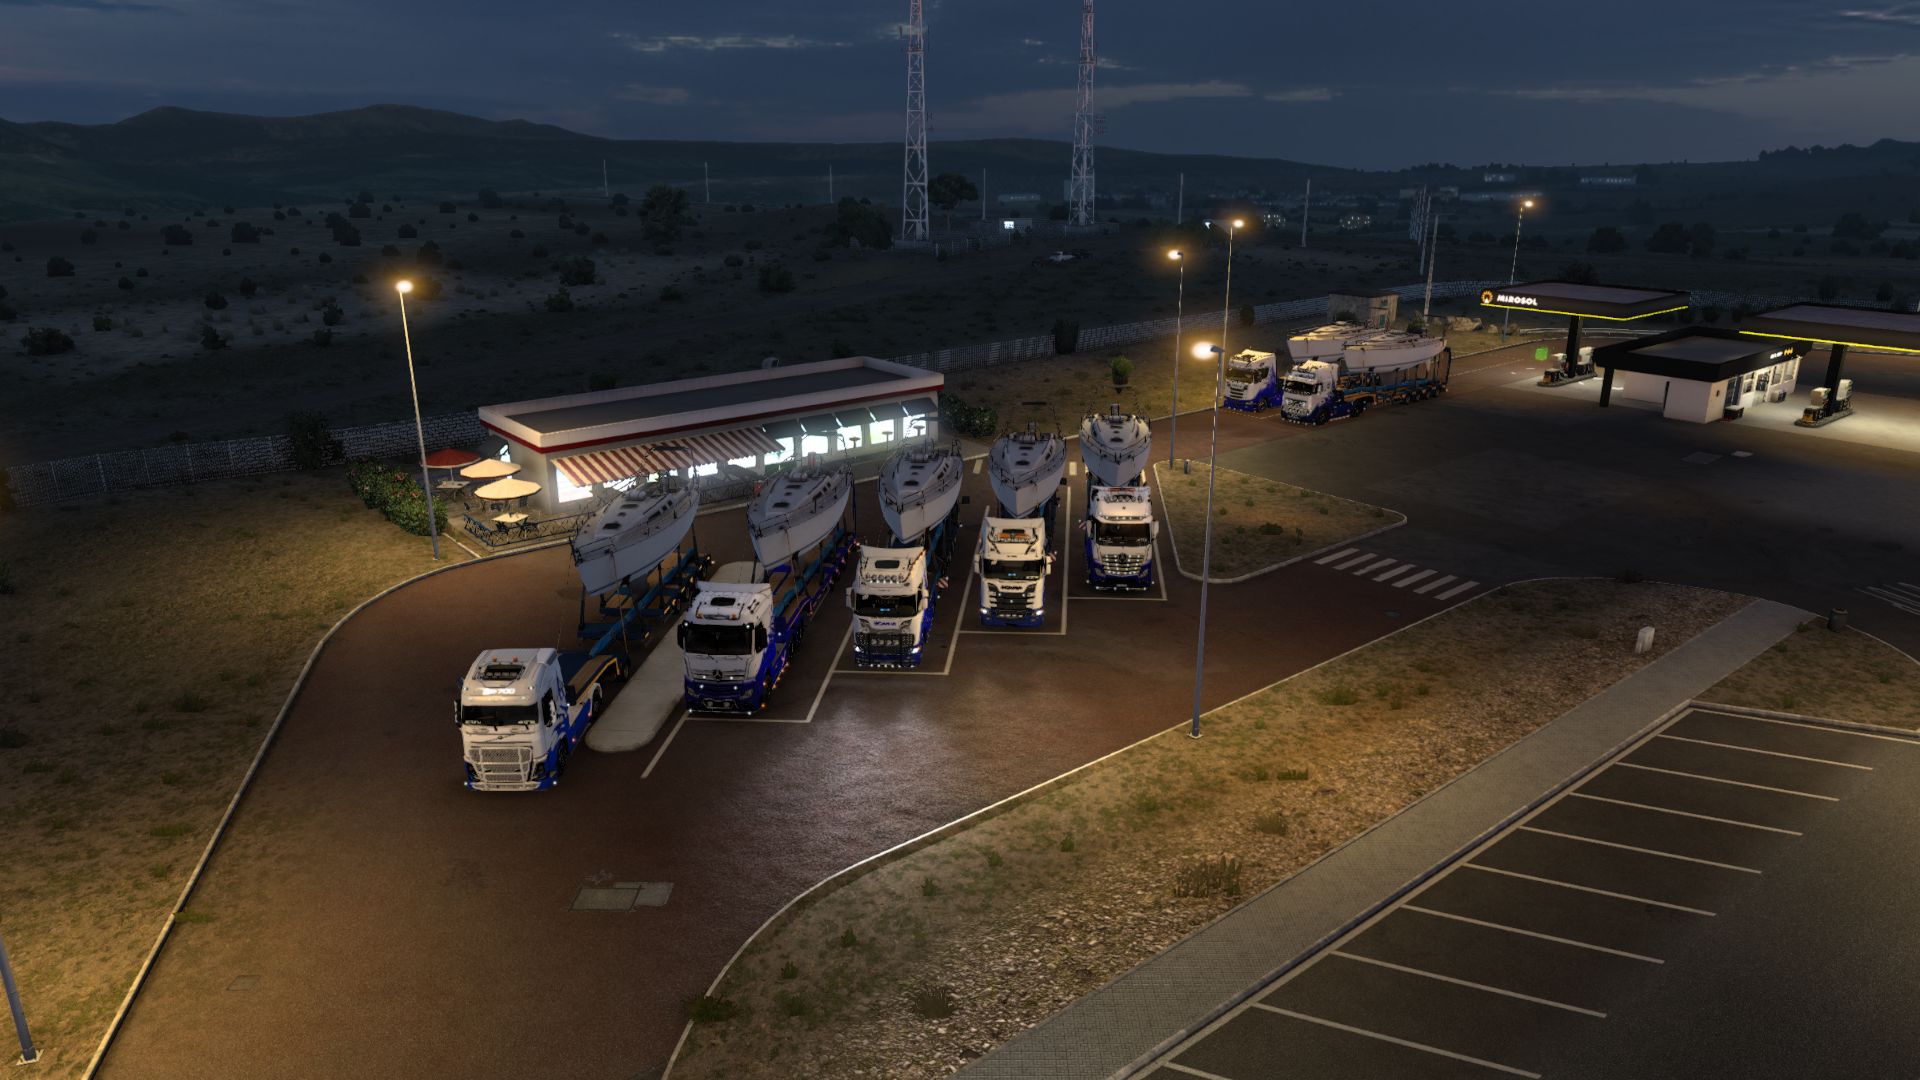 ets2_20220930_230116_00.png